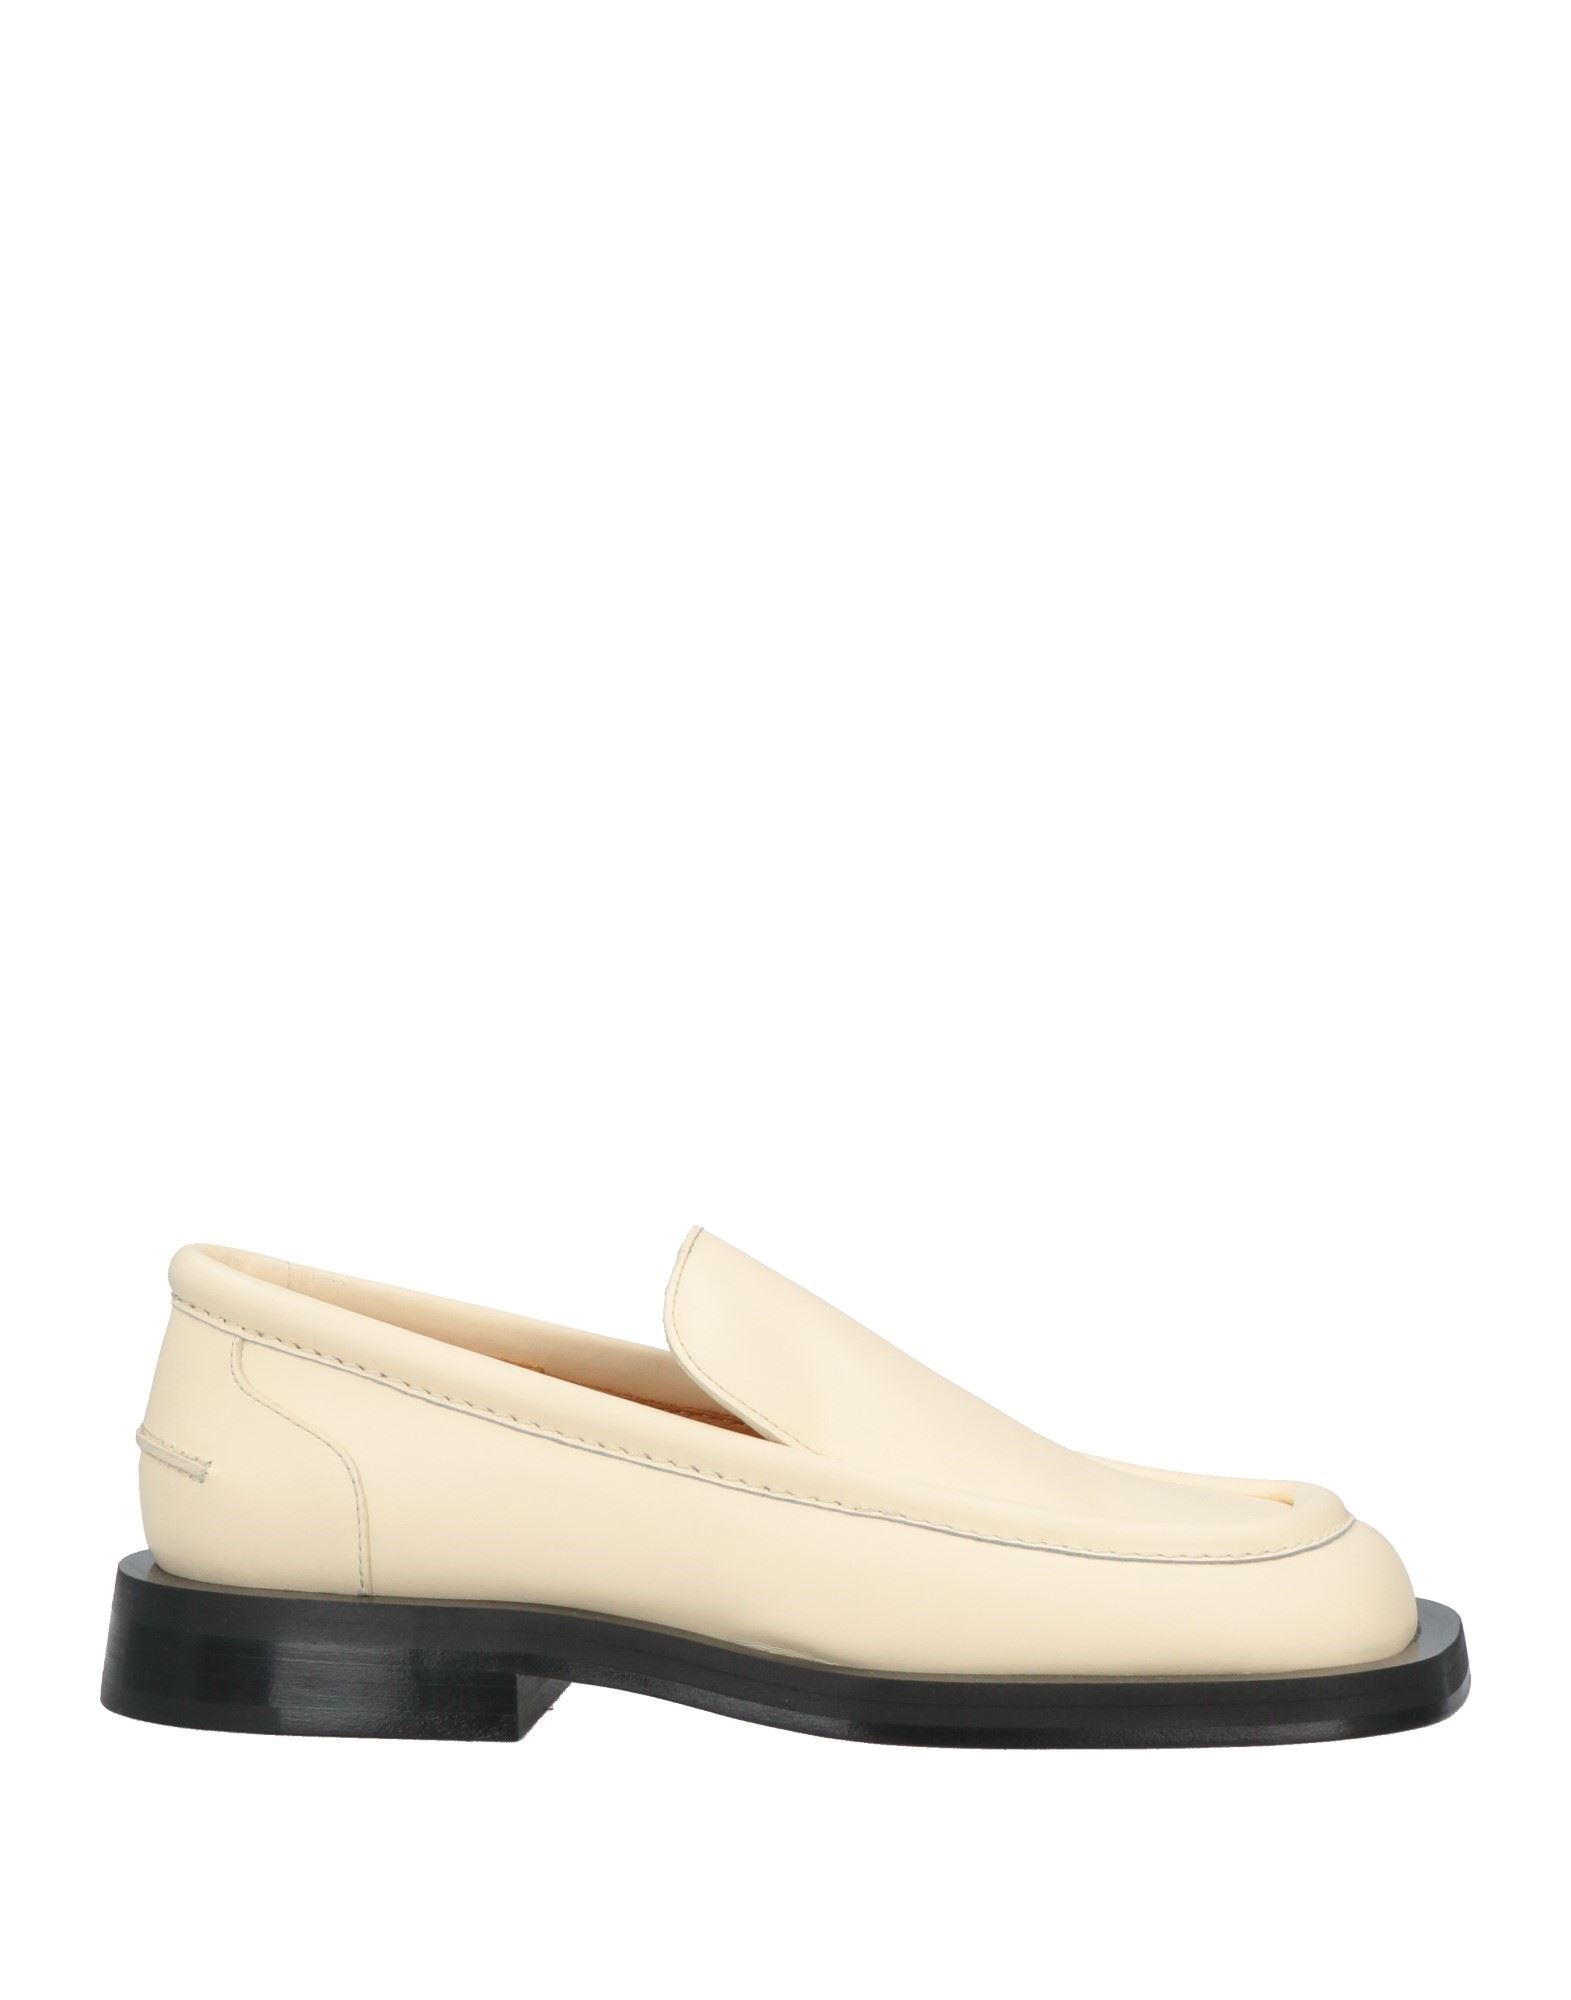 Shop Proenza Schouler Woman Loafers Ivory Size 8 Soft Leather In White